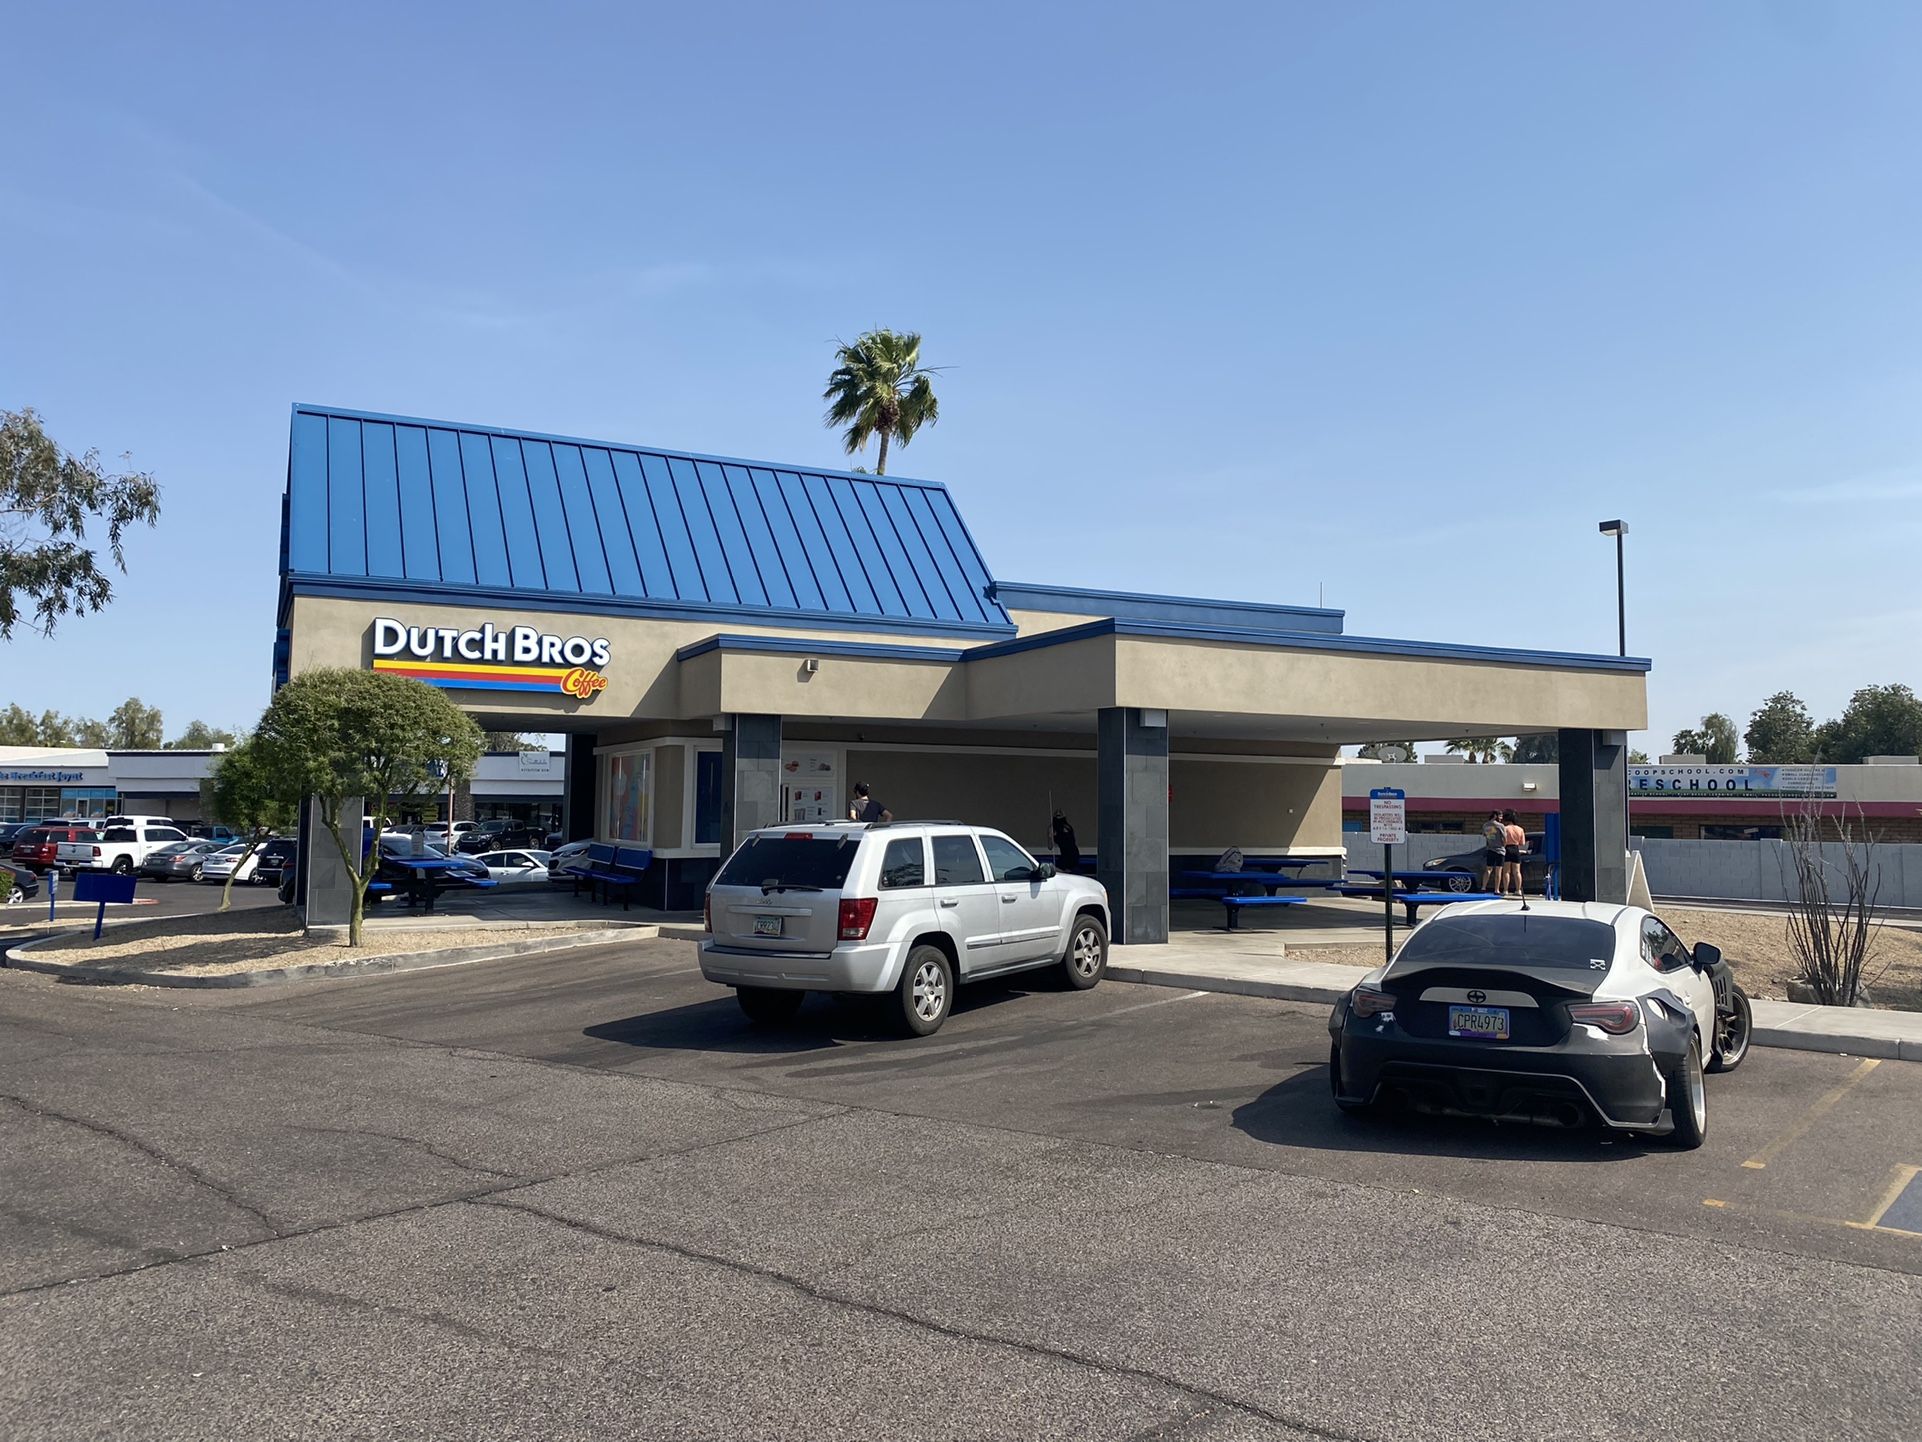 Dutch Bros Meeting Location Reference